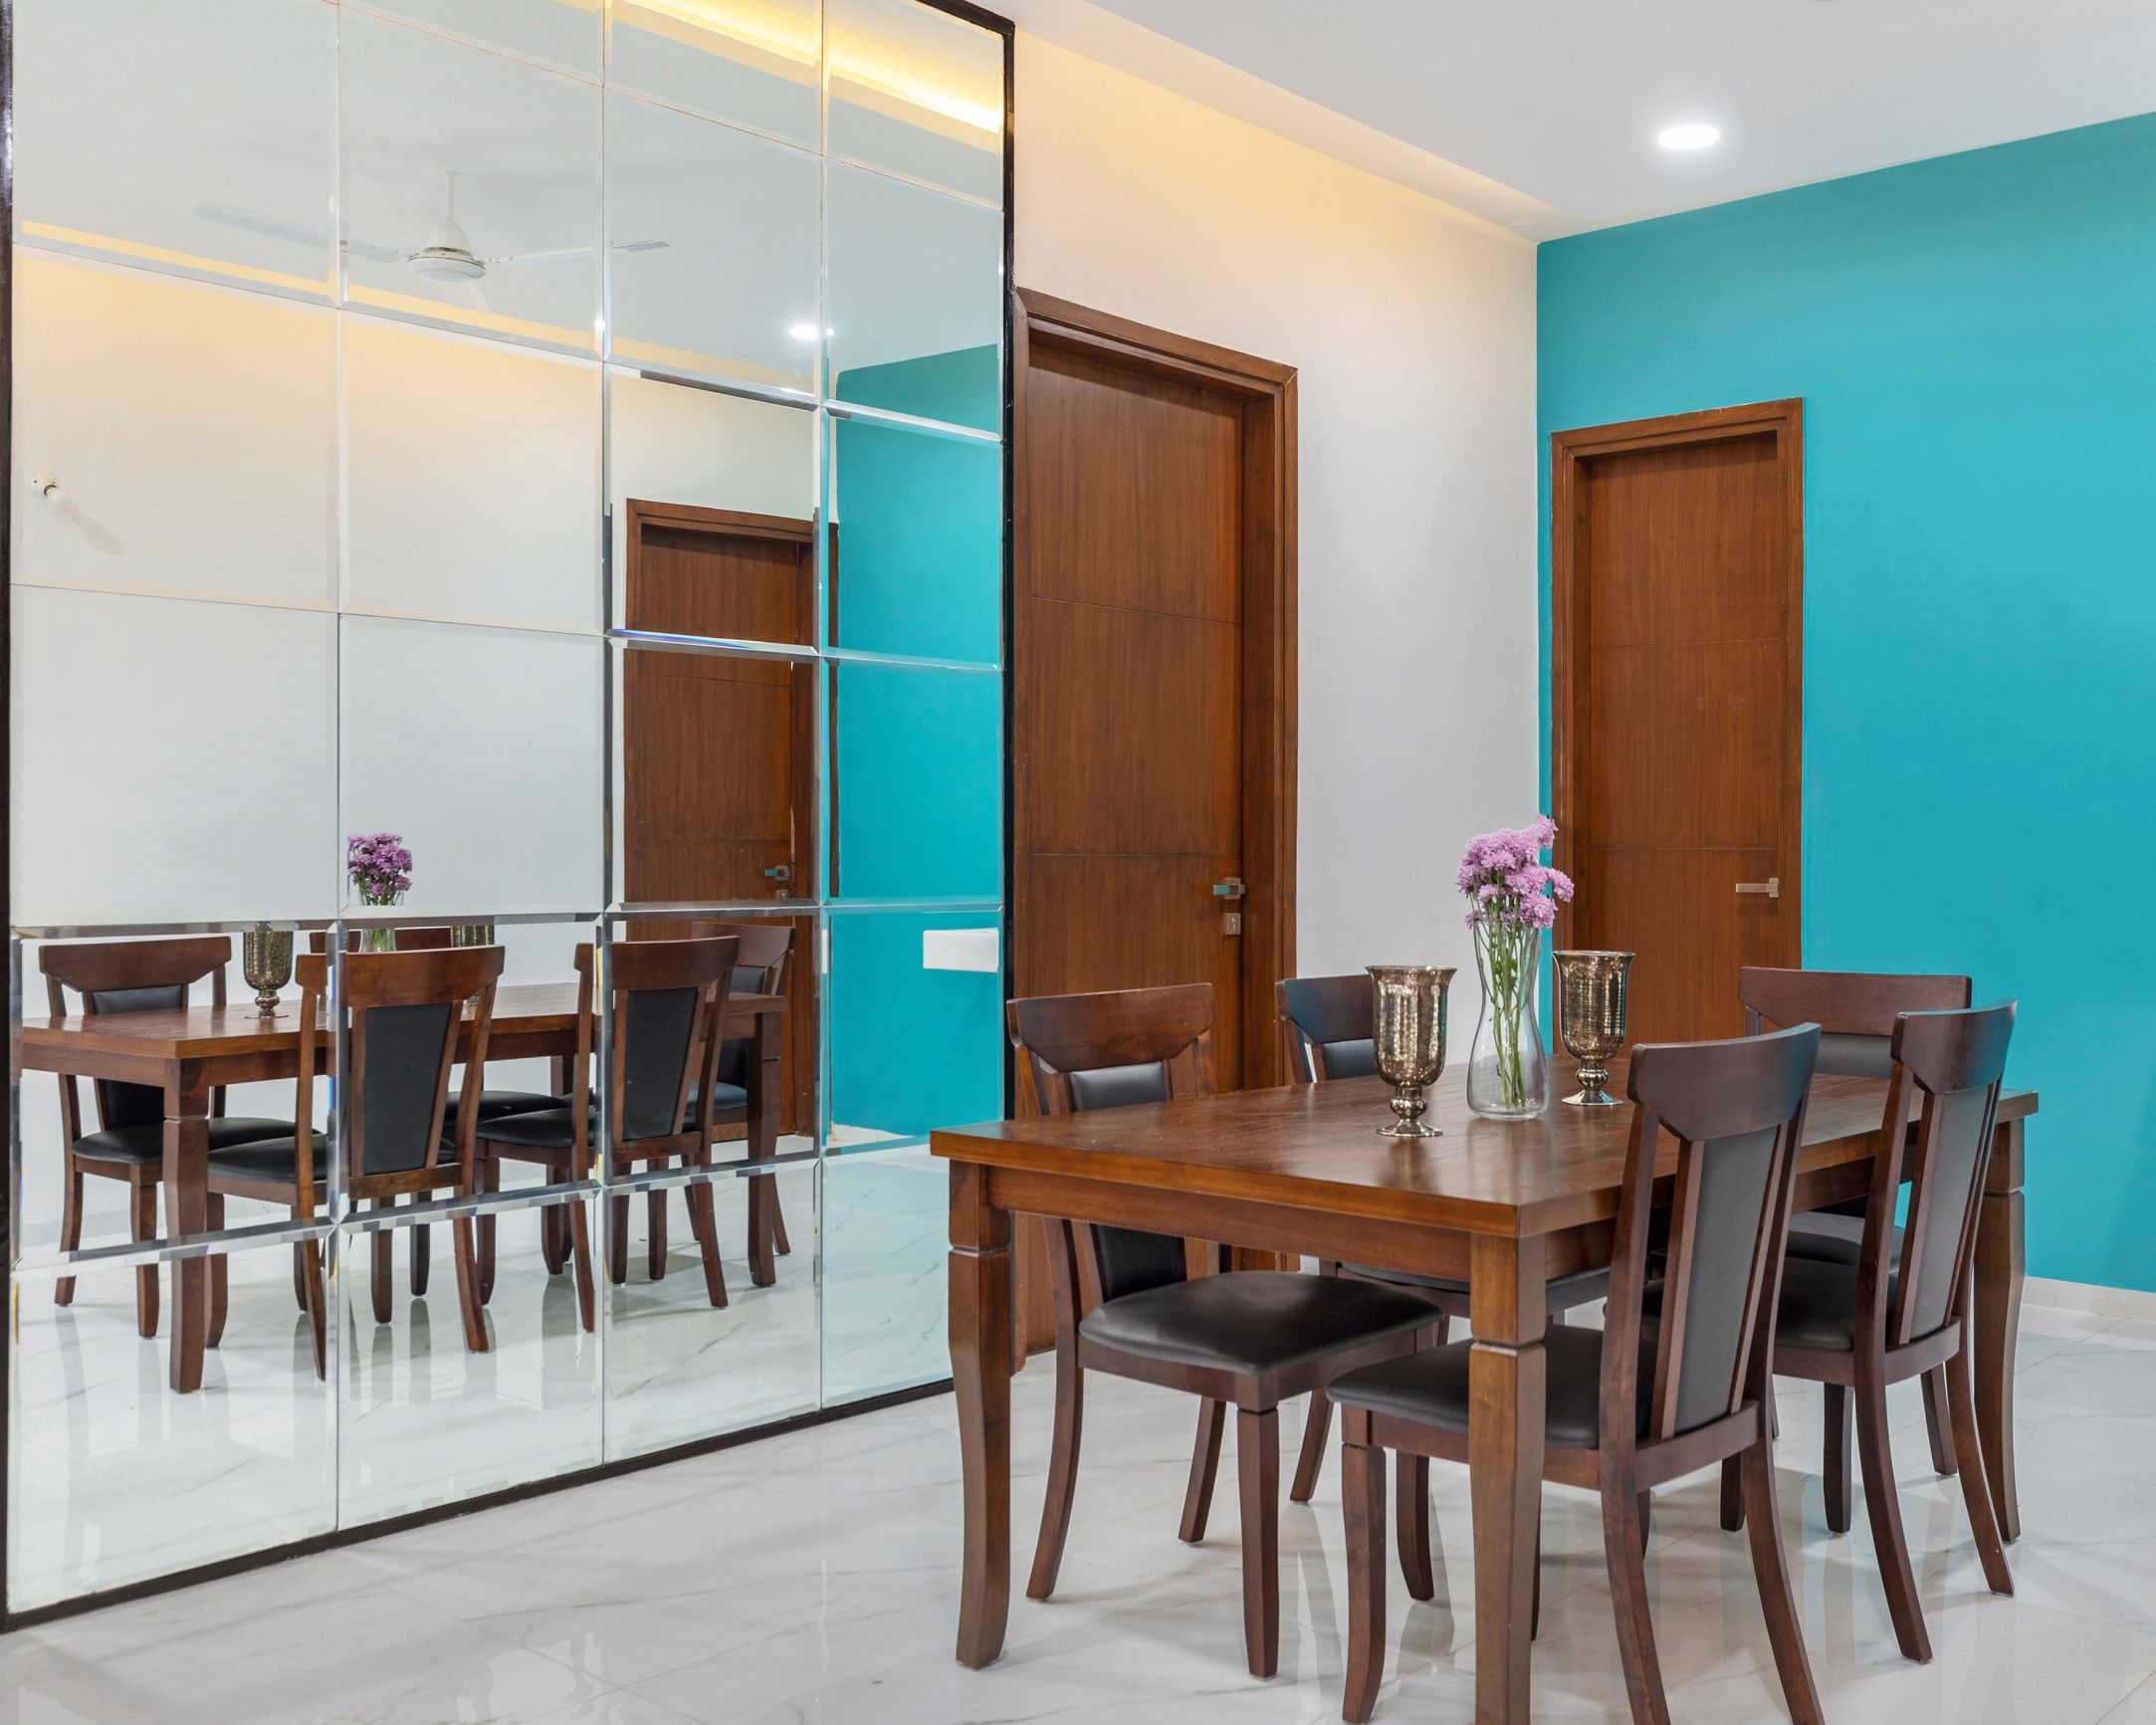 Classic 5-Seater Wooden Dining Room Design With Square Panelled Mirror Accent Wall